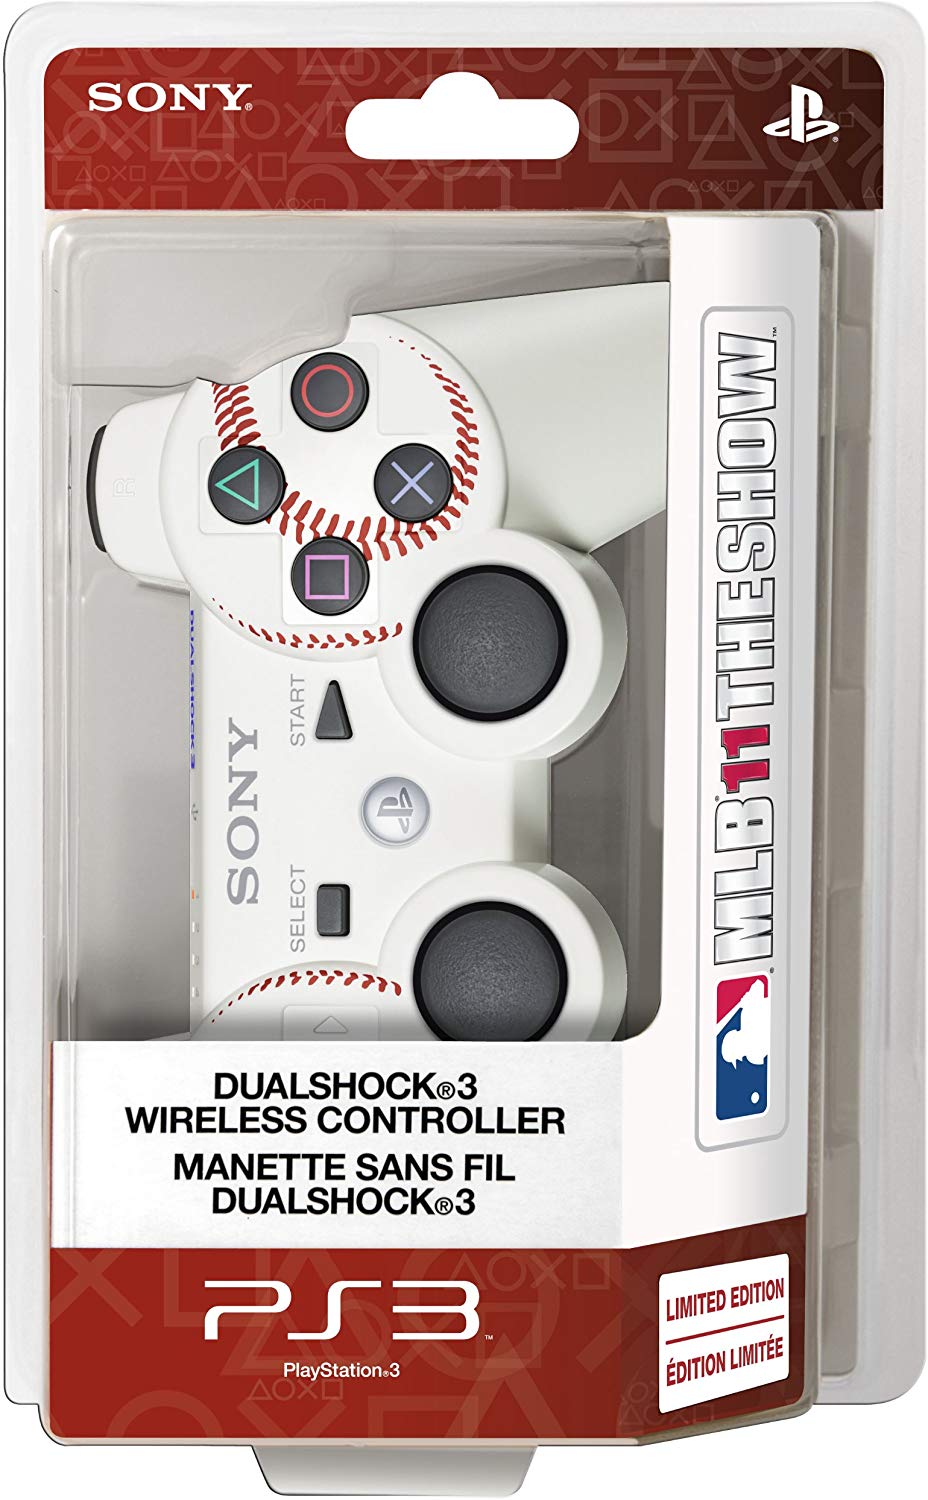 DualShock 3 Wireless Controller MLB 11 The Show Edition